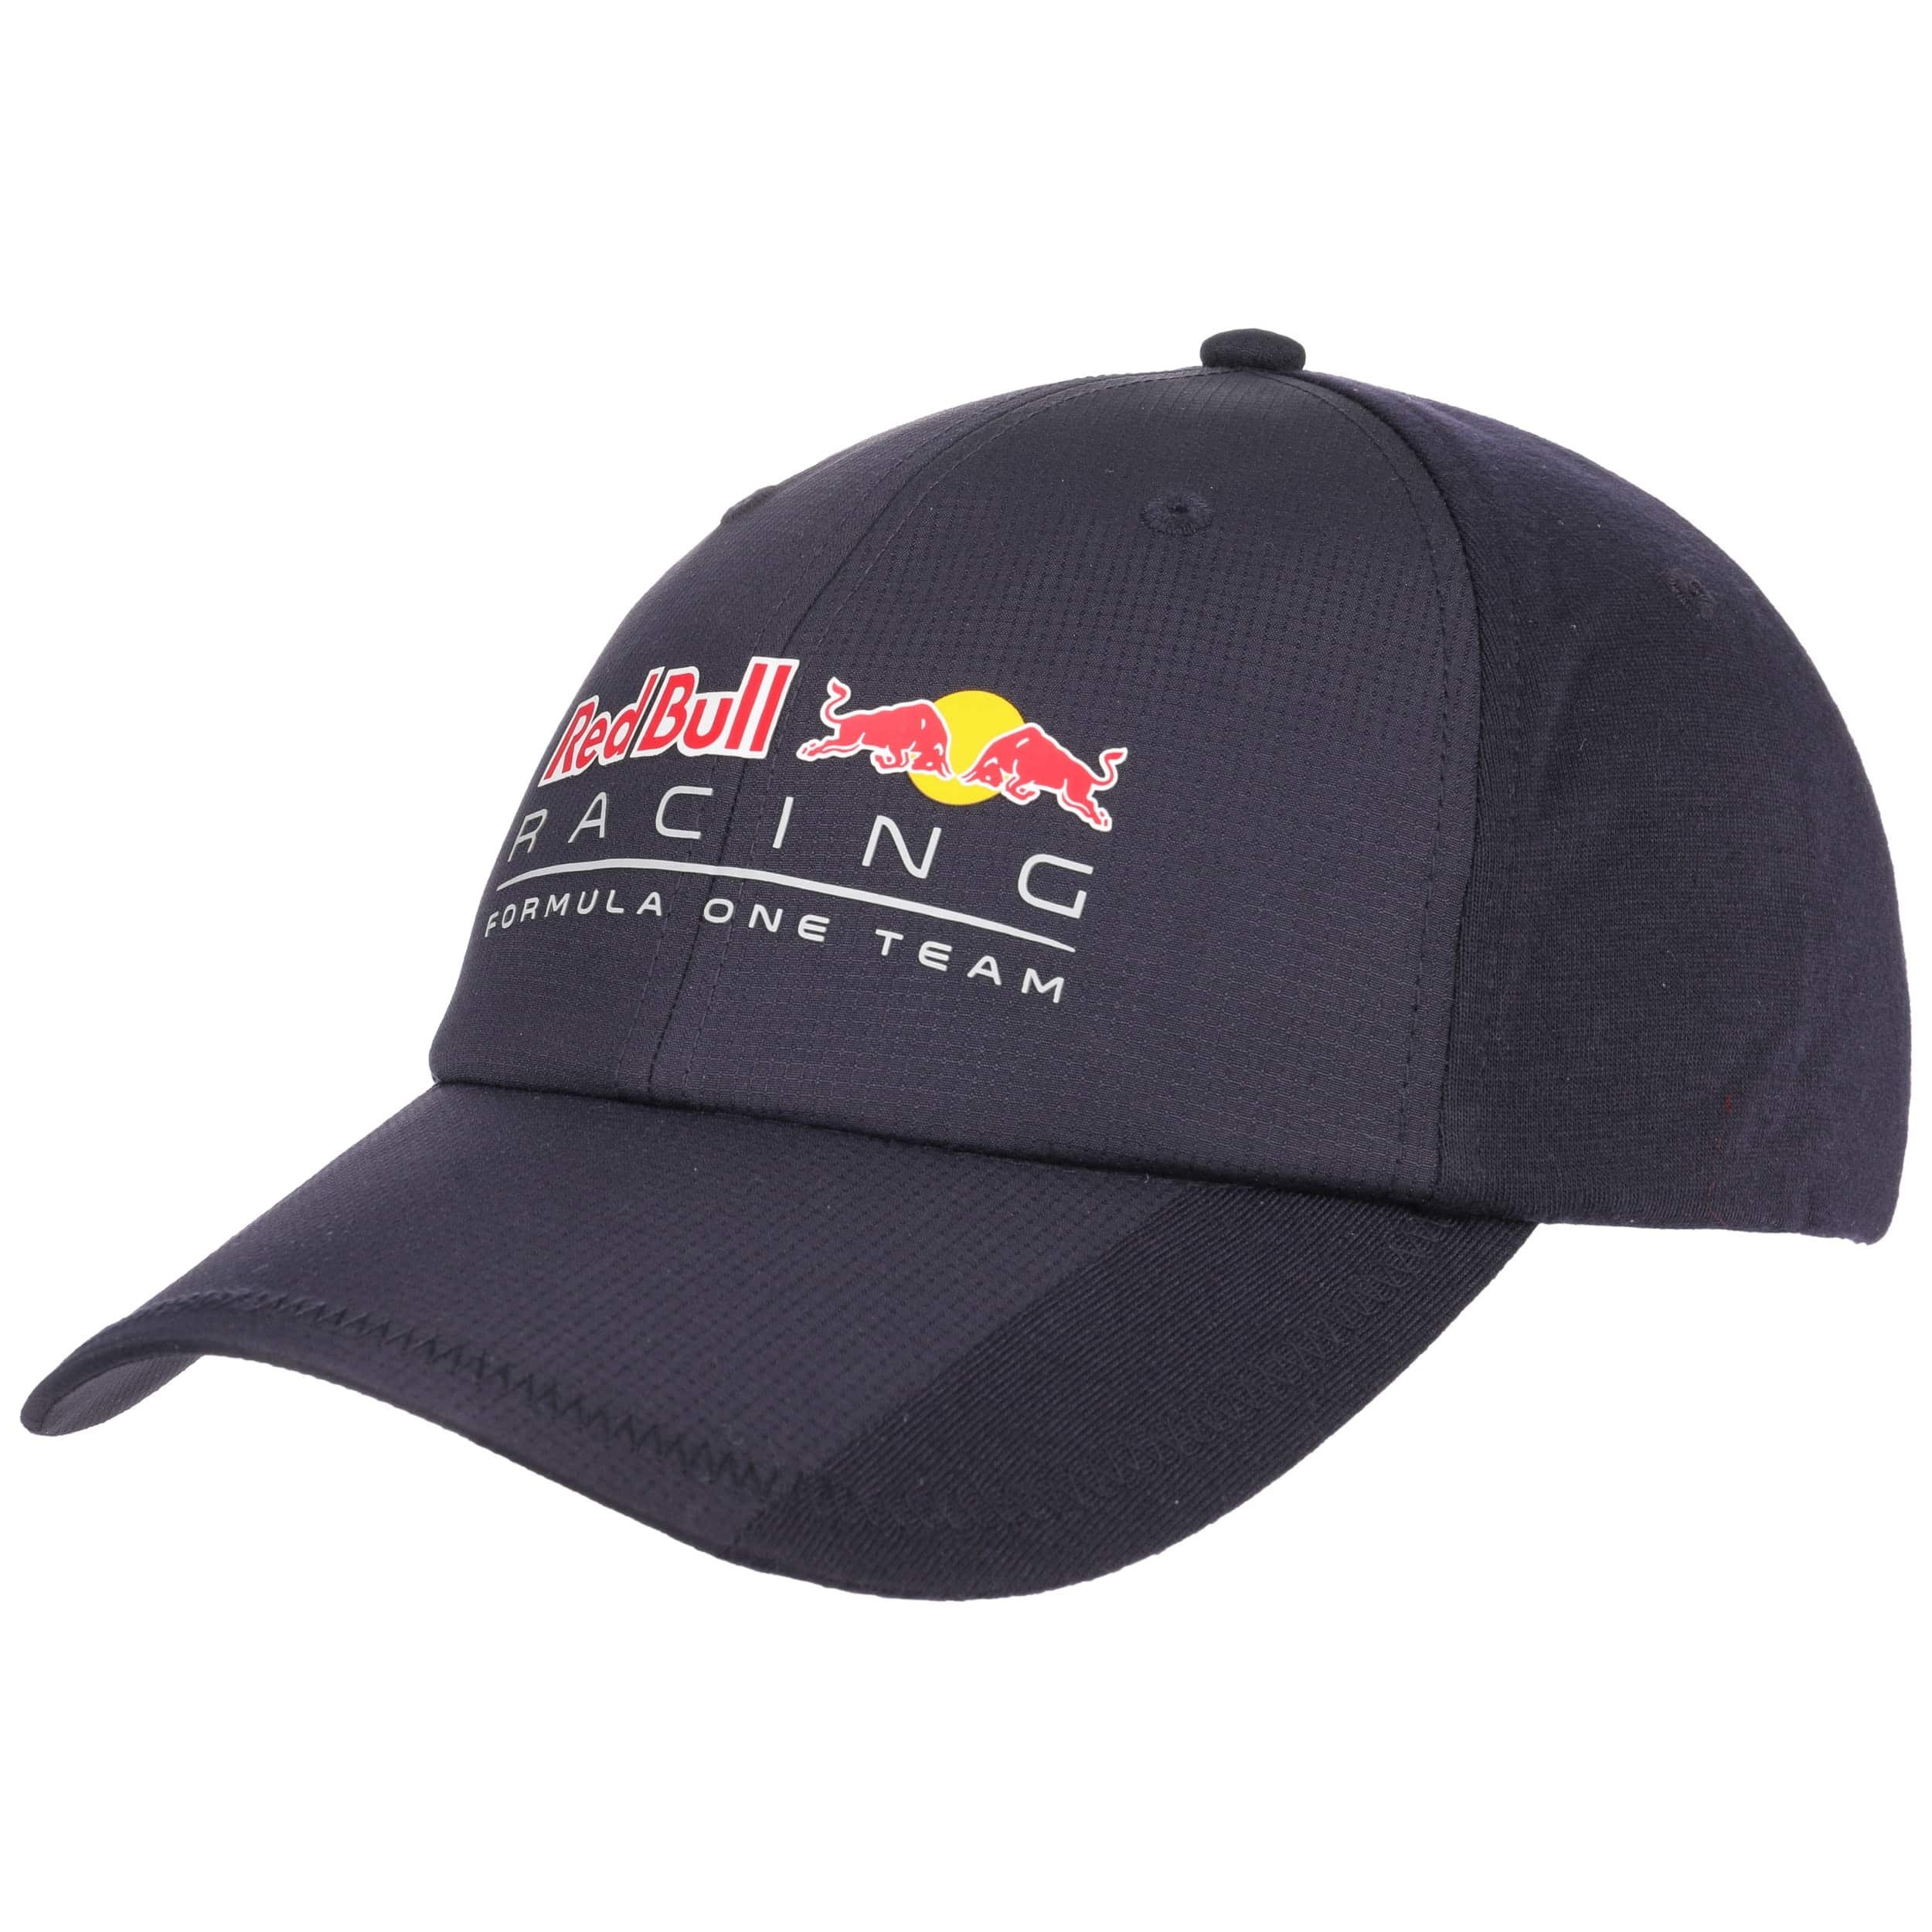 Red Bull Racing Lifestyle Pet by PUMA - 29,95